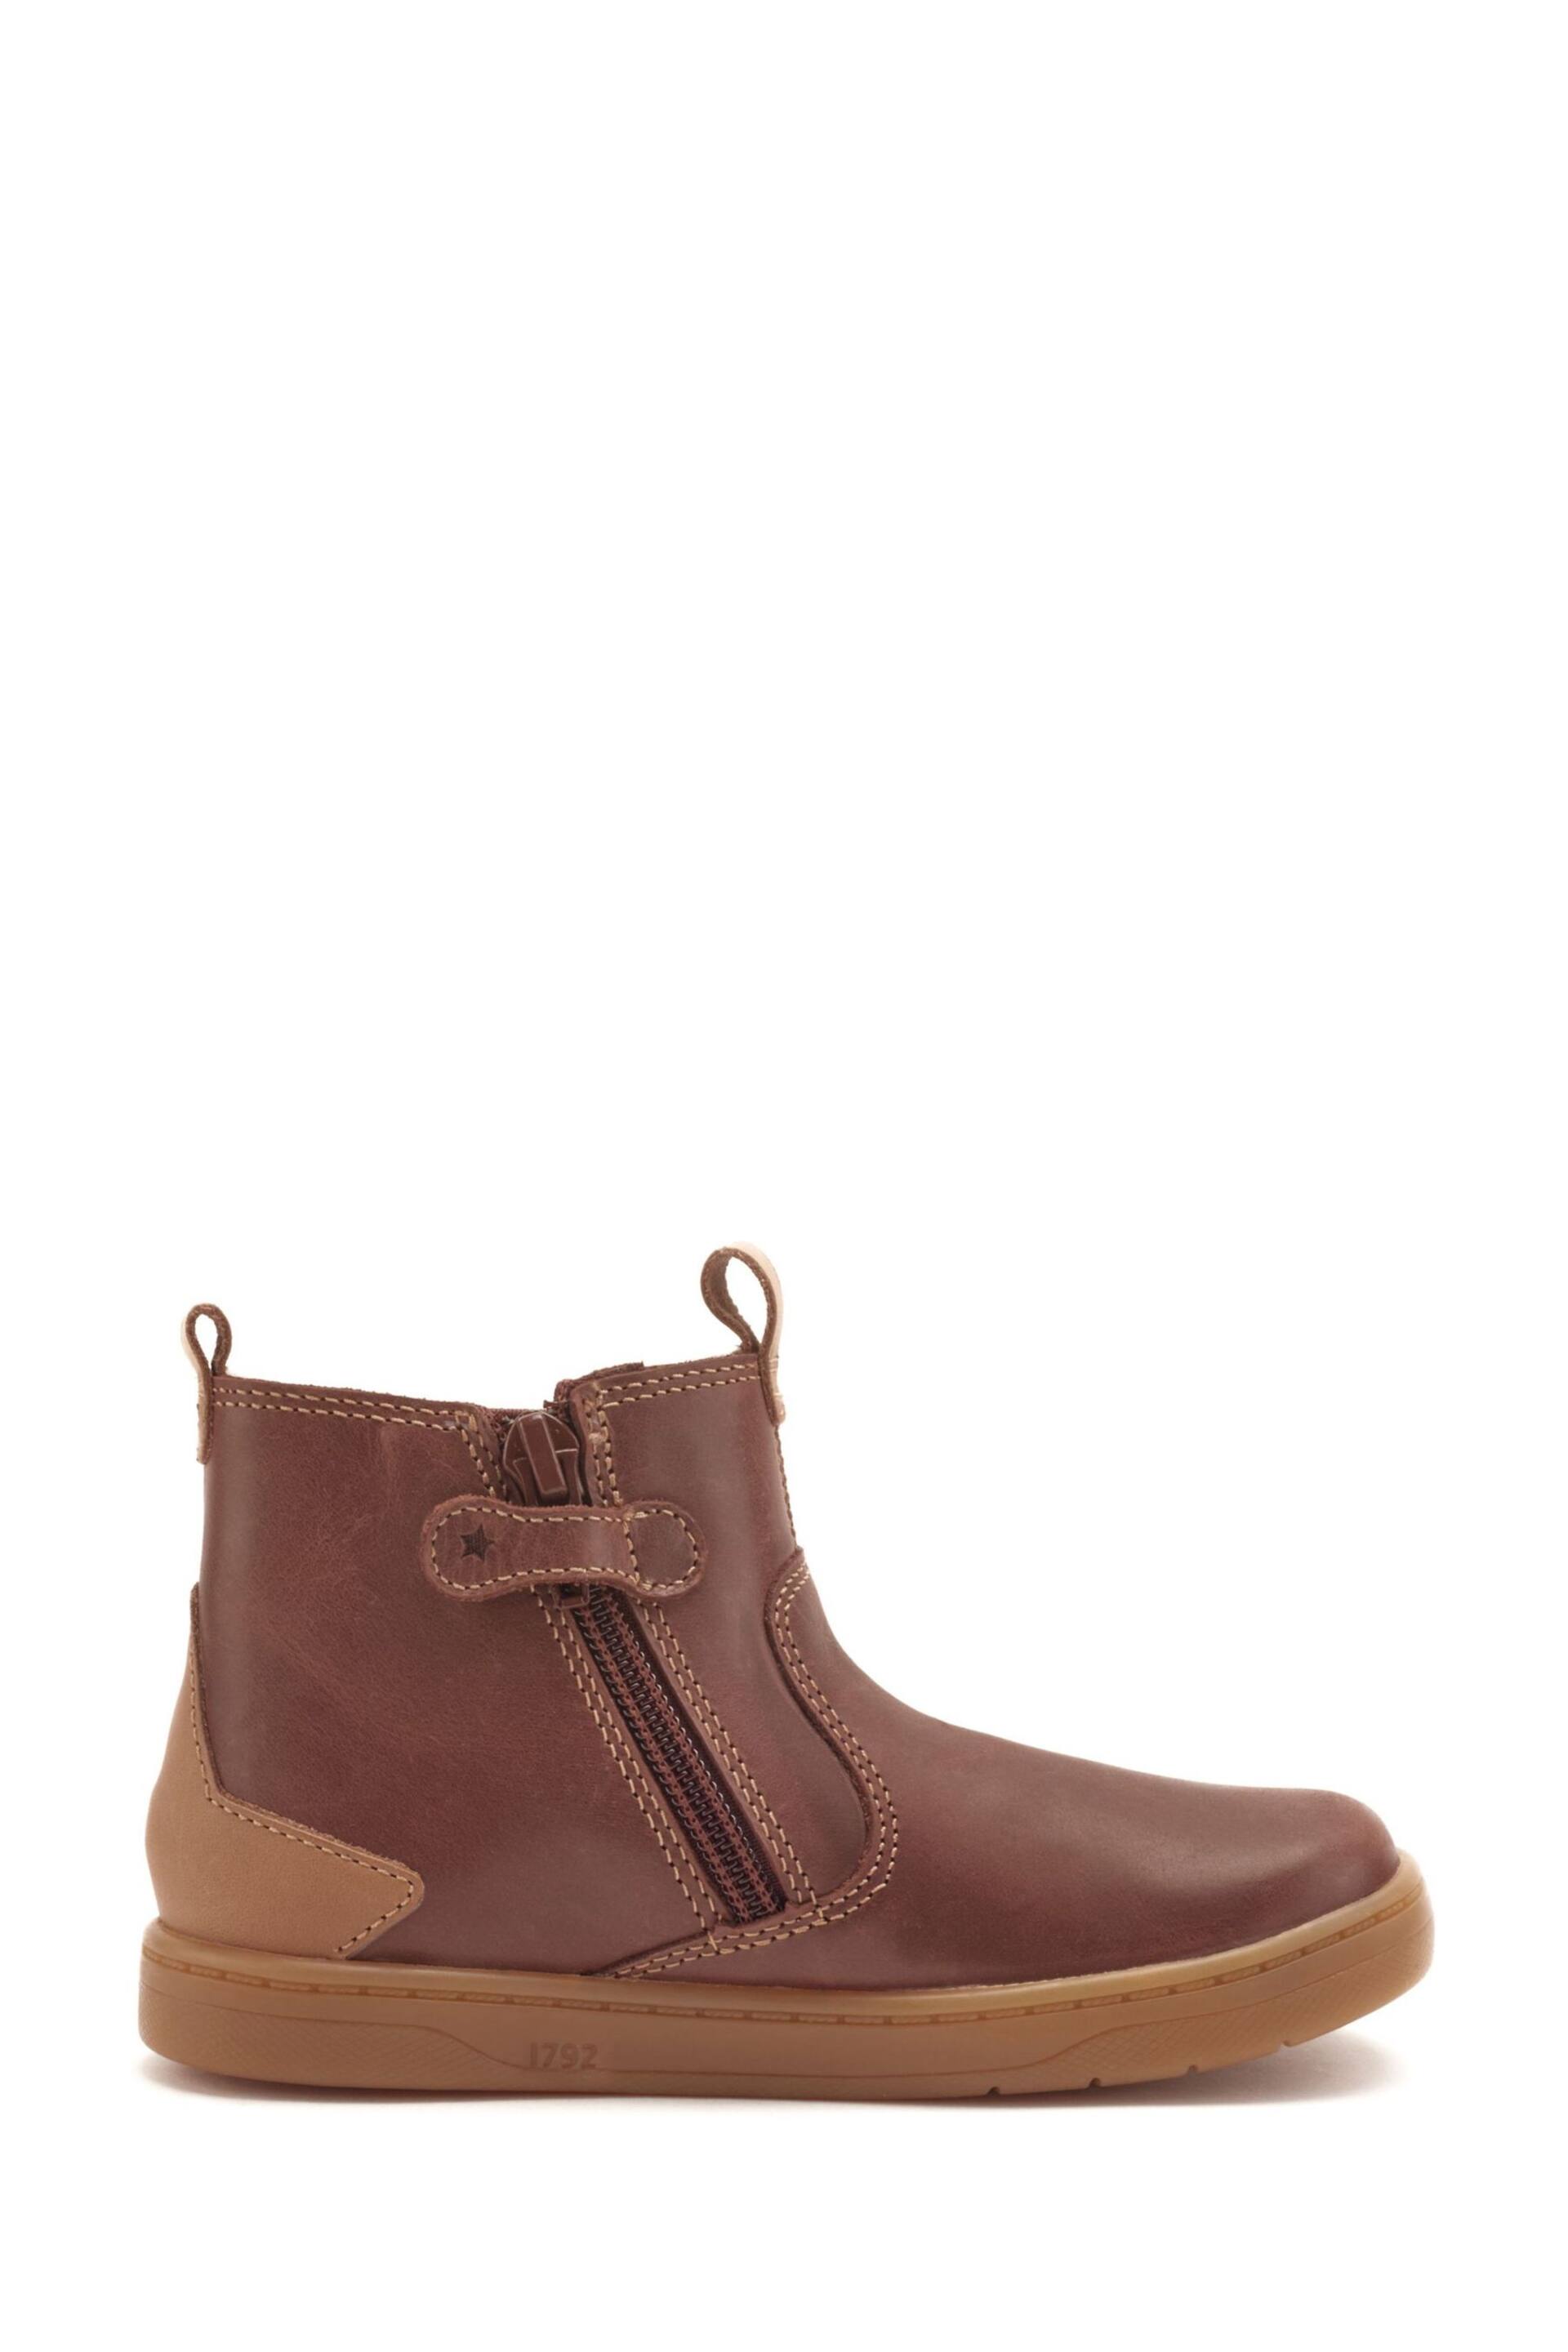 Start Rite Energy F Fit Natural Leather Zip Up Chelsea Boots - Image 3 of 6